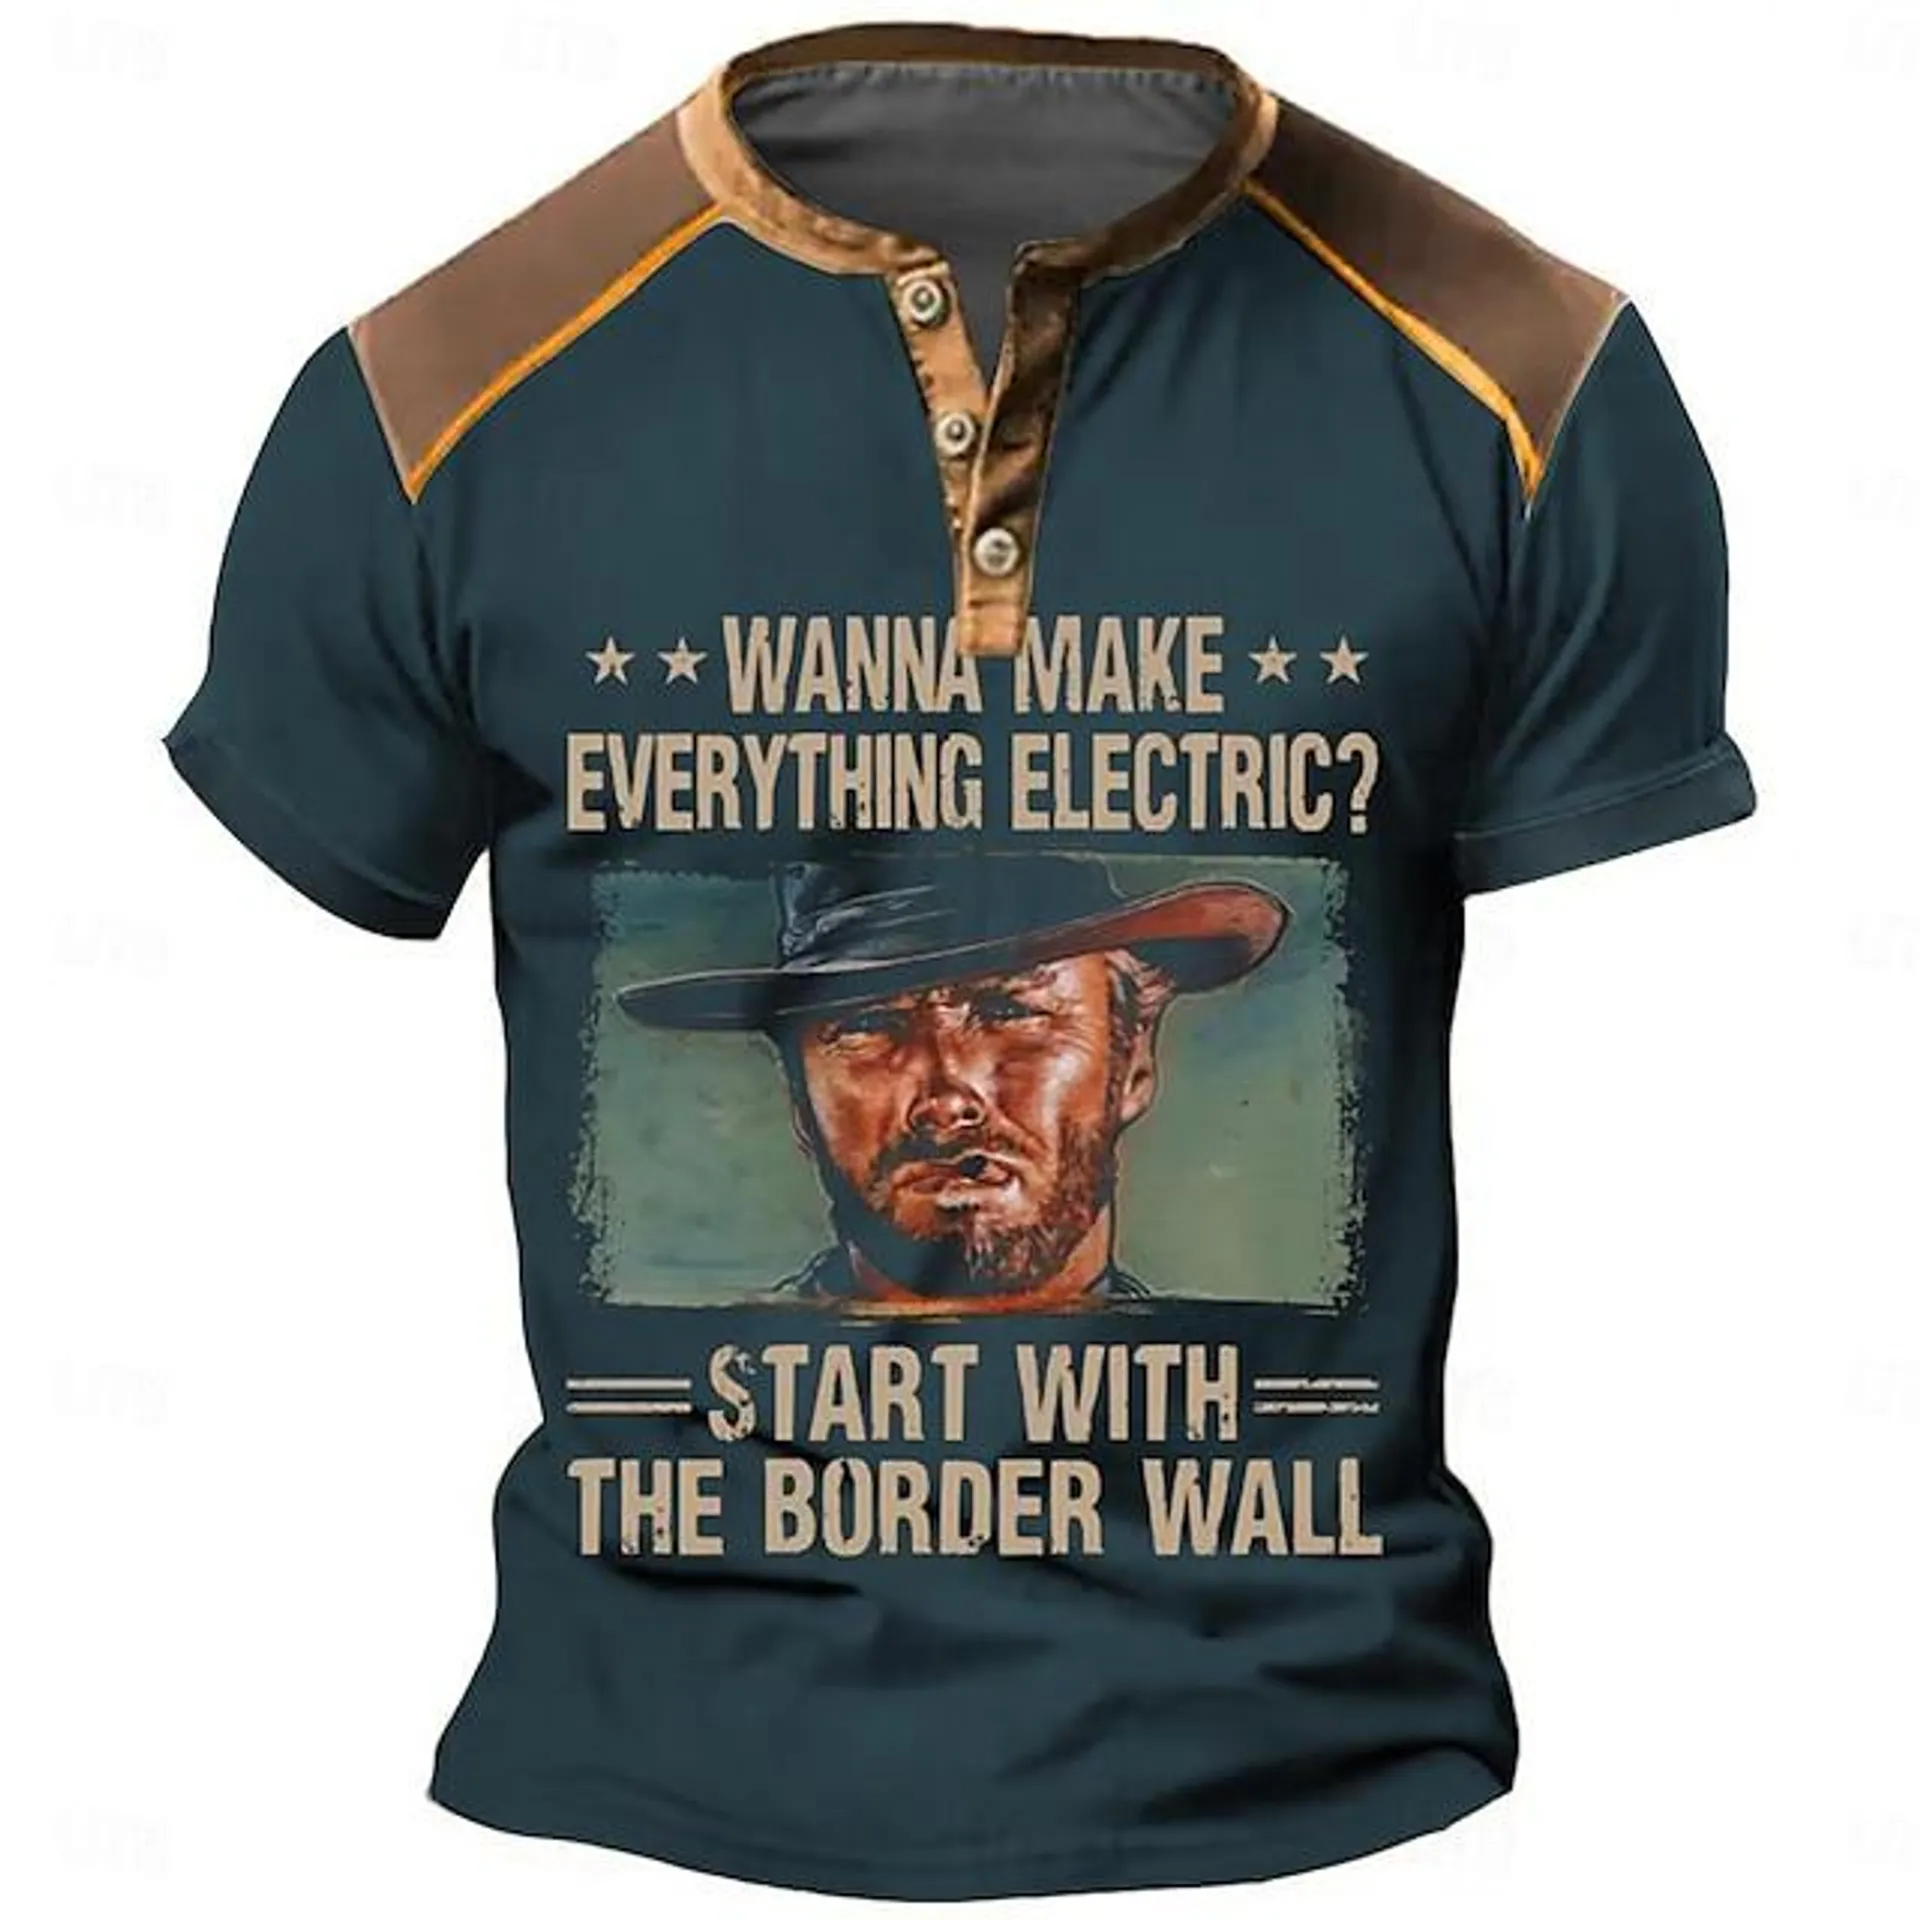 Wanna Make Everything Electric Start With The Border Wall Men's Fashion Casual Street Style 3D Print T shirt Tee Henley Shirt Street Sports Outdoor Casual T shirt Black Dark Green Brown Short Sleeve